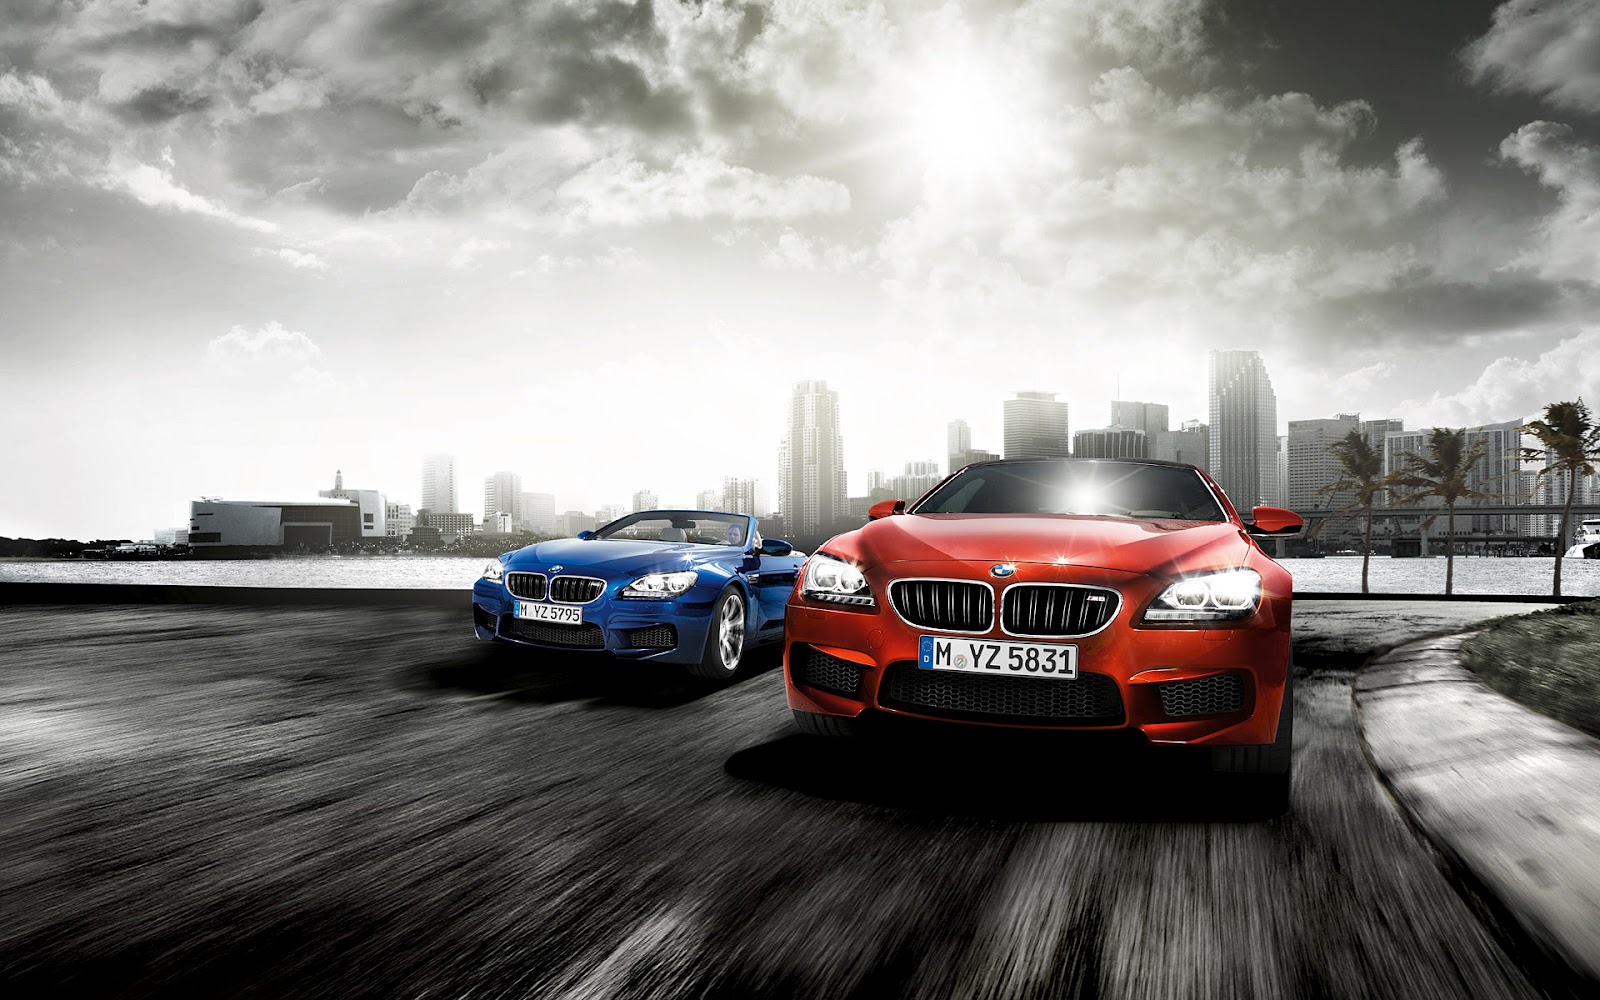 the related wallpapers of bmw m5 bmw m5 bmw m5 bmw m5 bmw m5